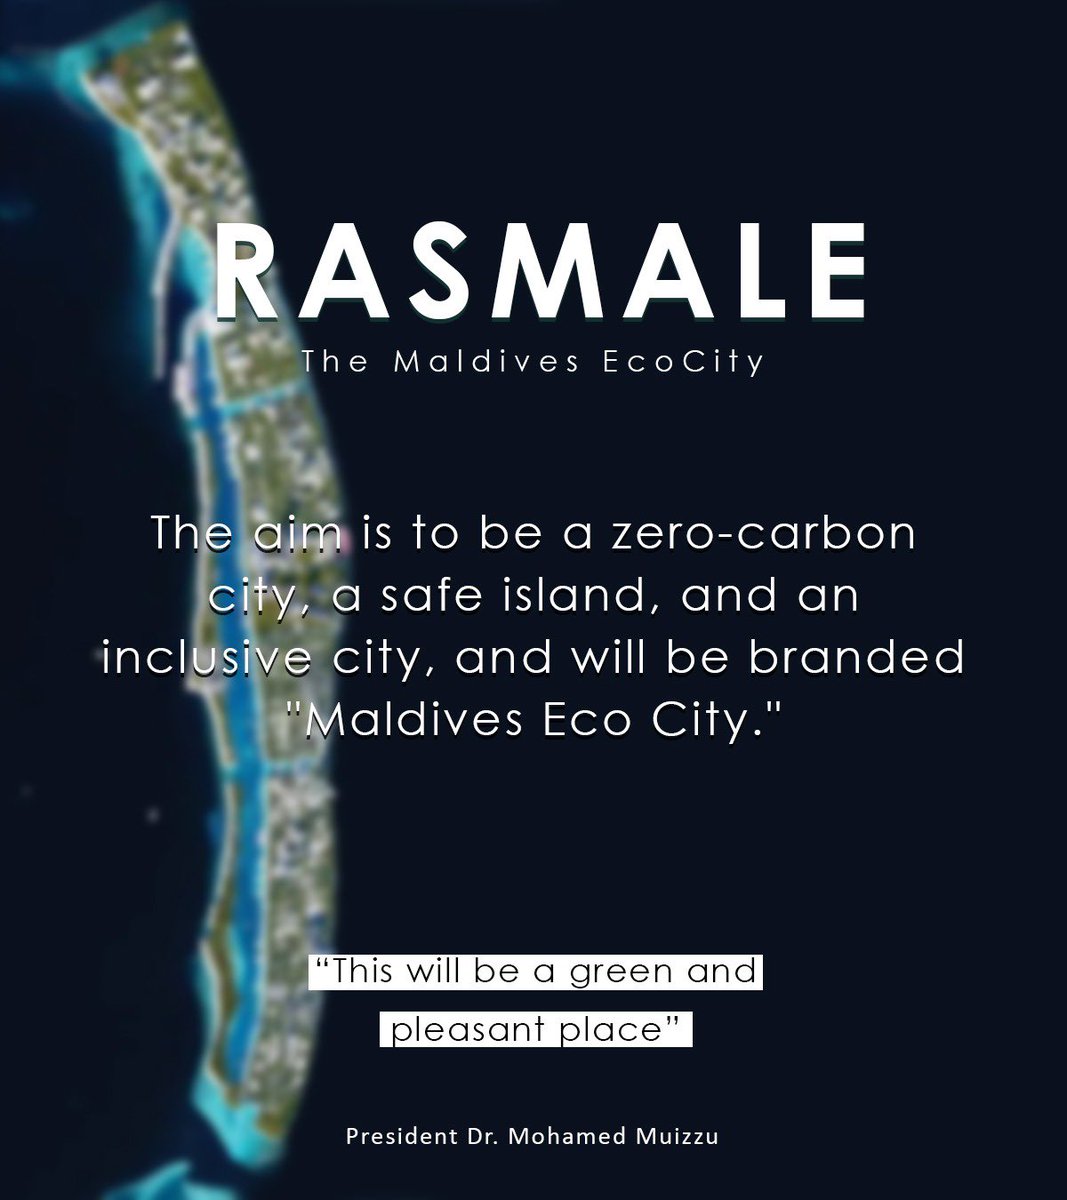 RASMALE’ - The Maldives EcoCity

Aim to be a zero-carbon city, a safe island and an inclusive city.
@MMuizzu 

#MuizzuDhuveli 
#DhiveheengeRaajje